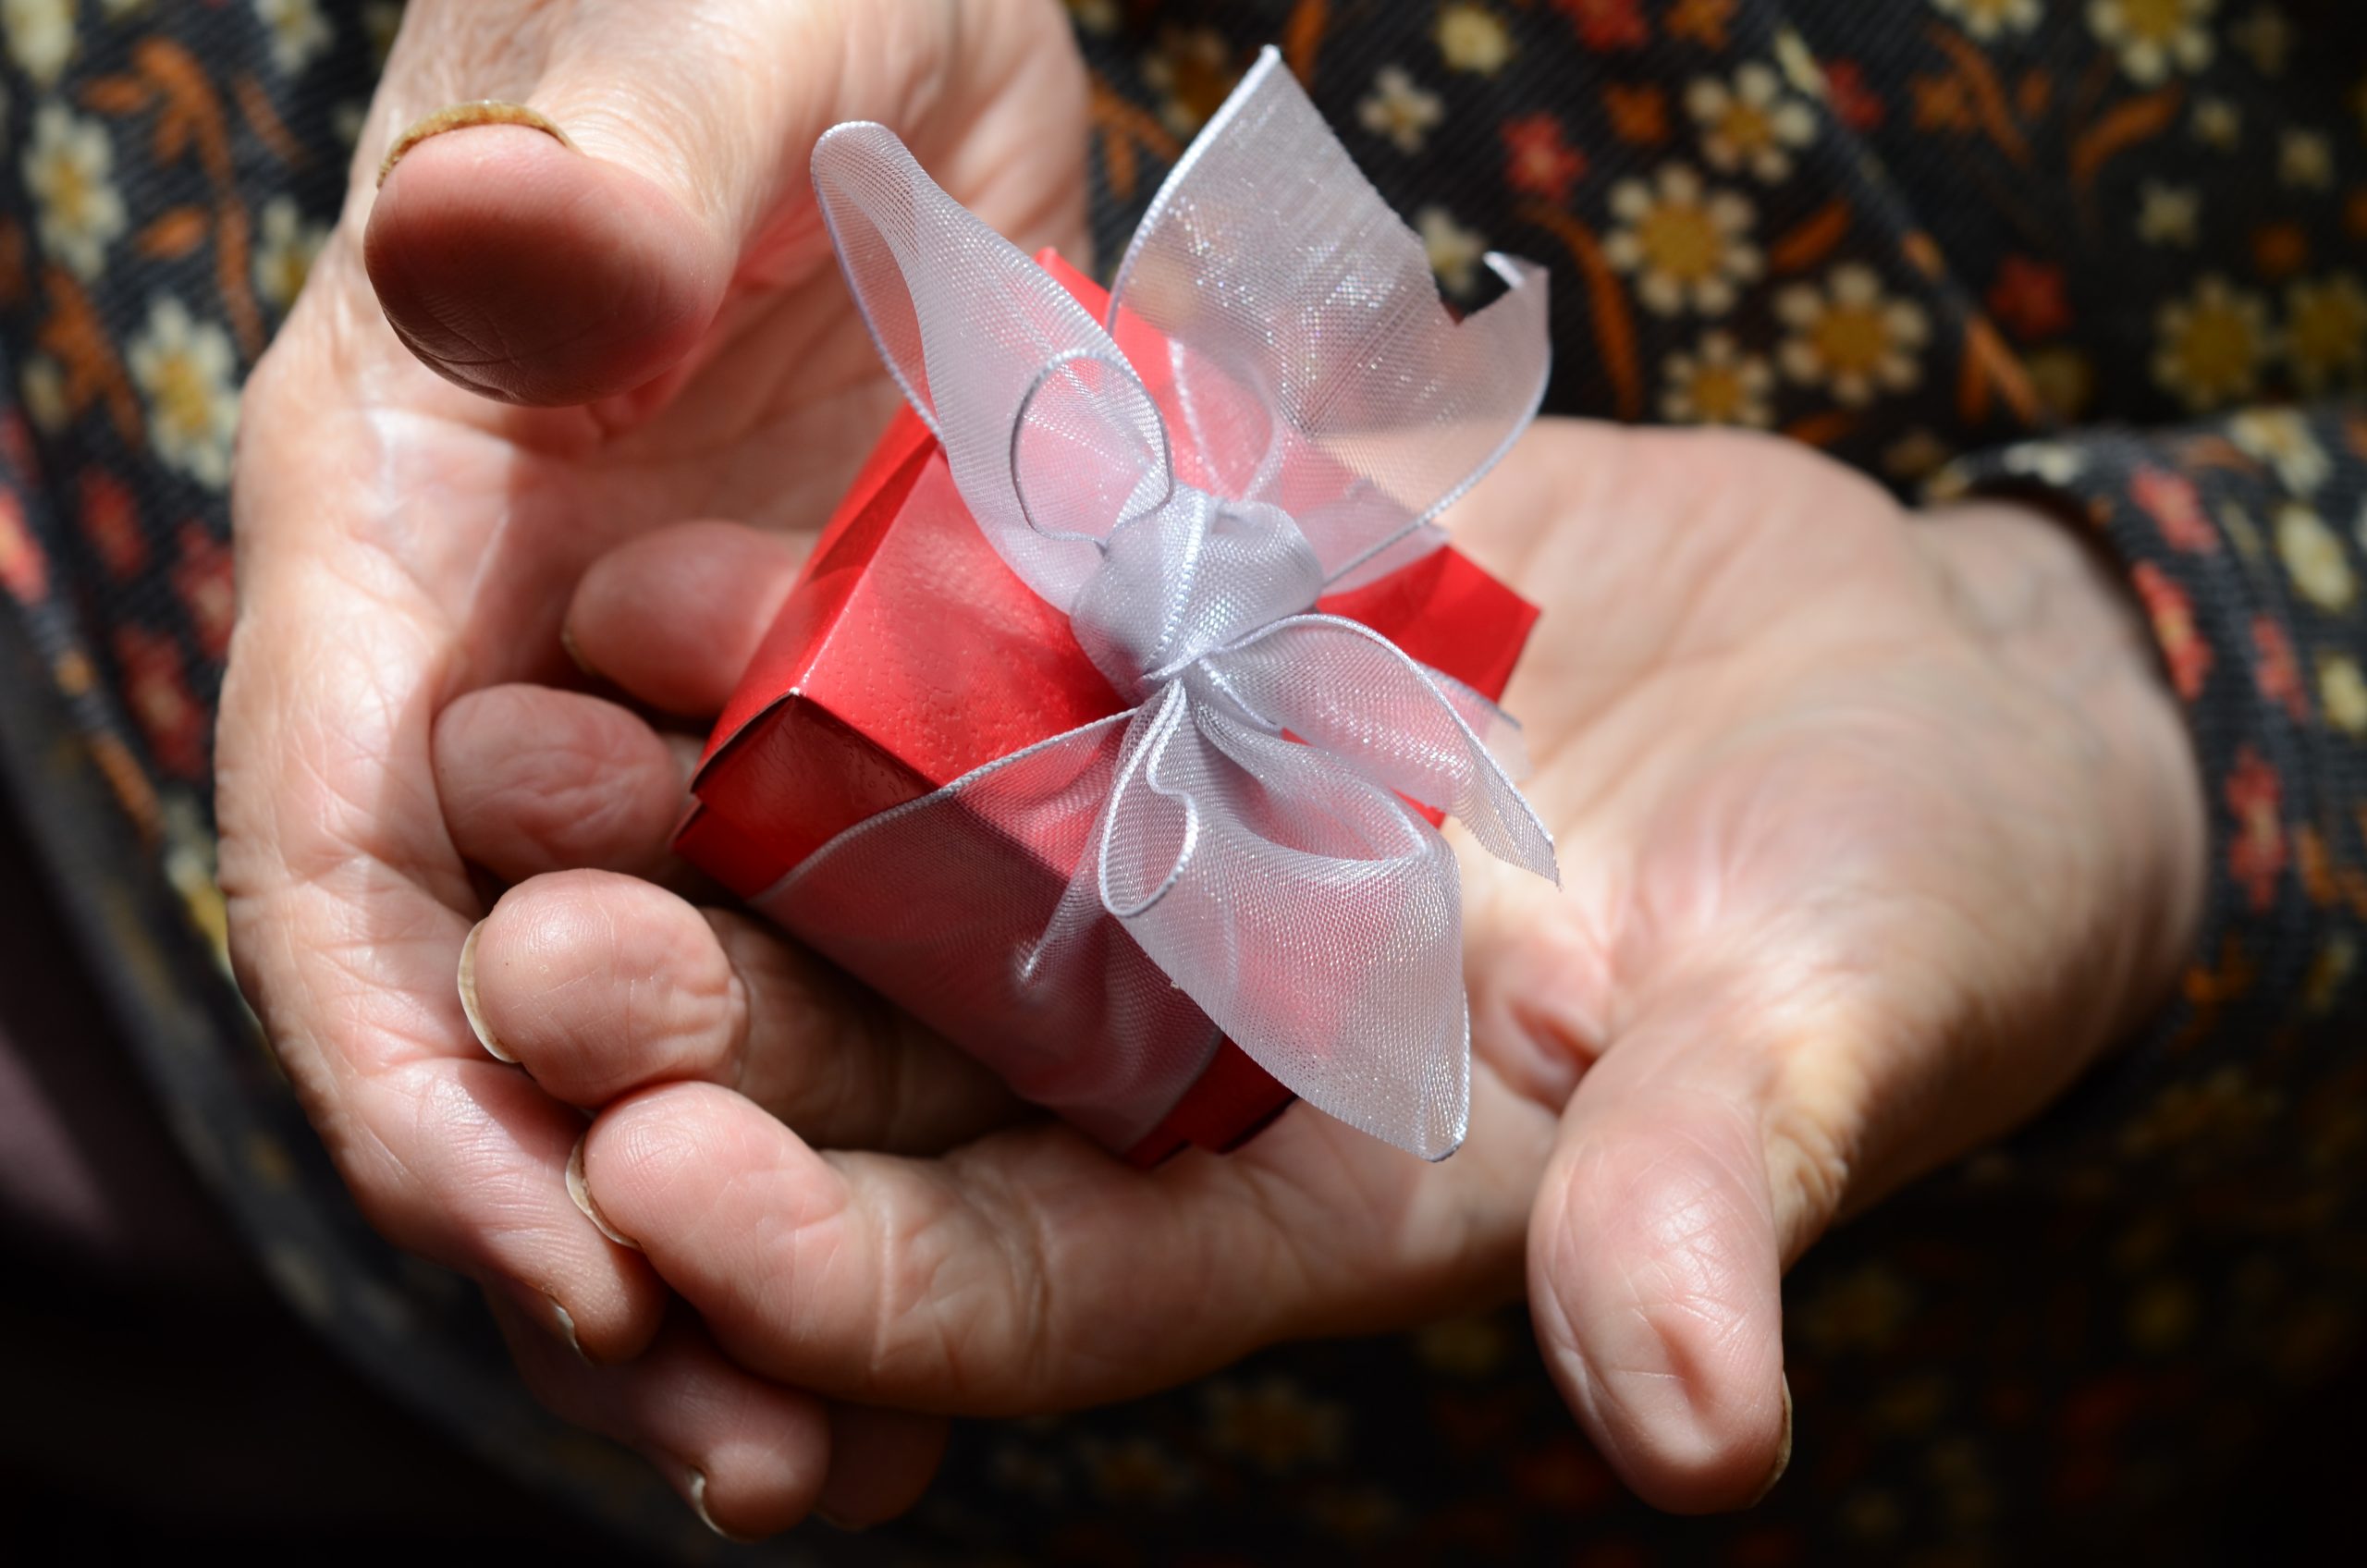 lady with dementia holding a red present box which is wrapped with a bow